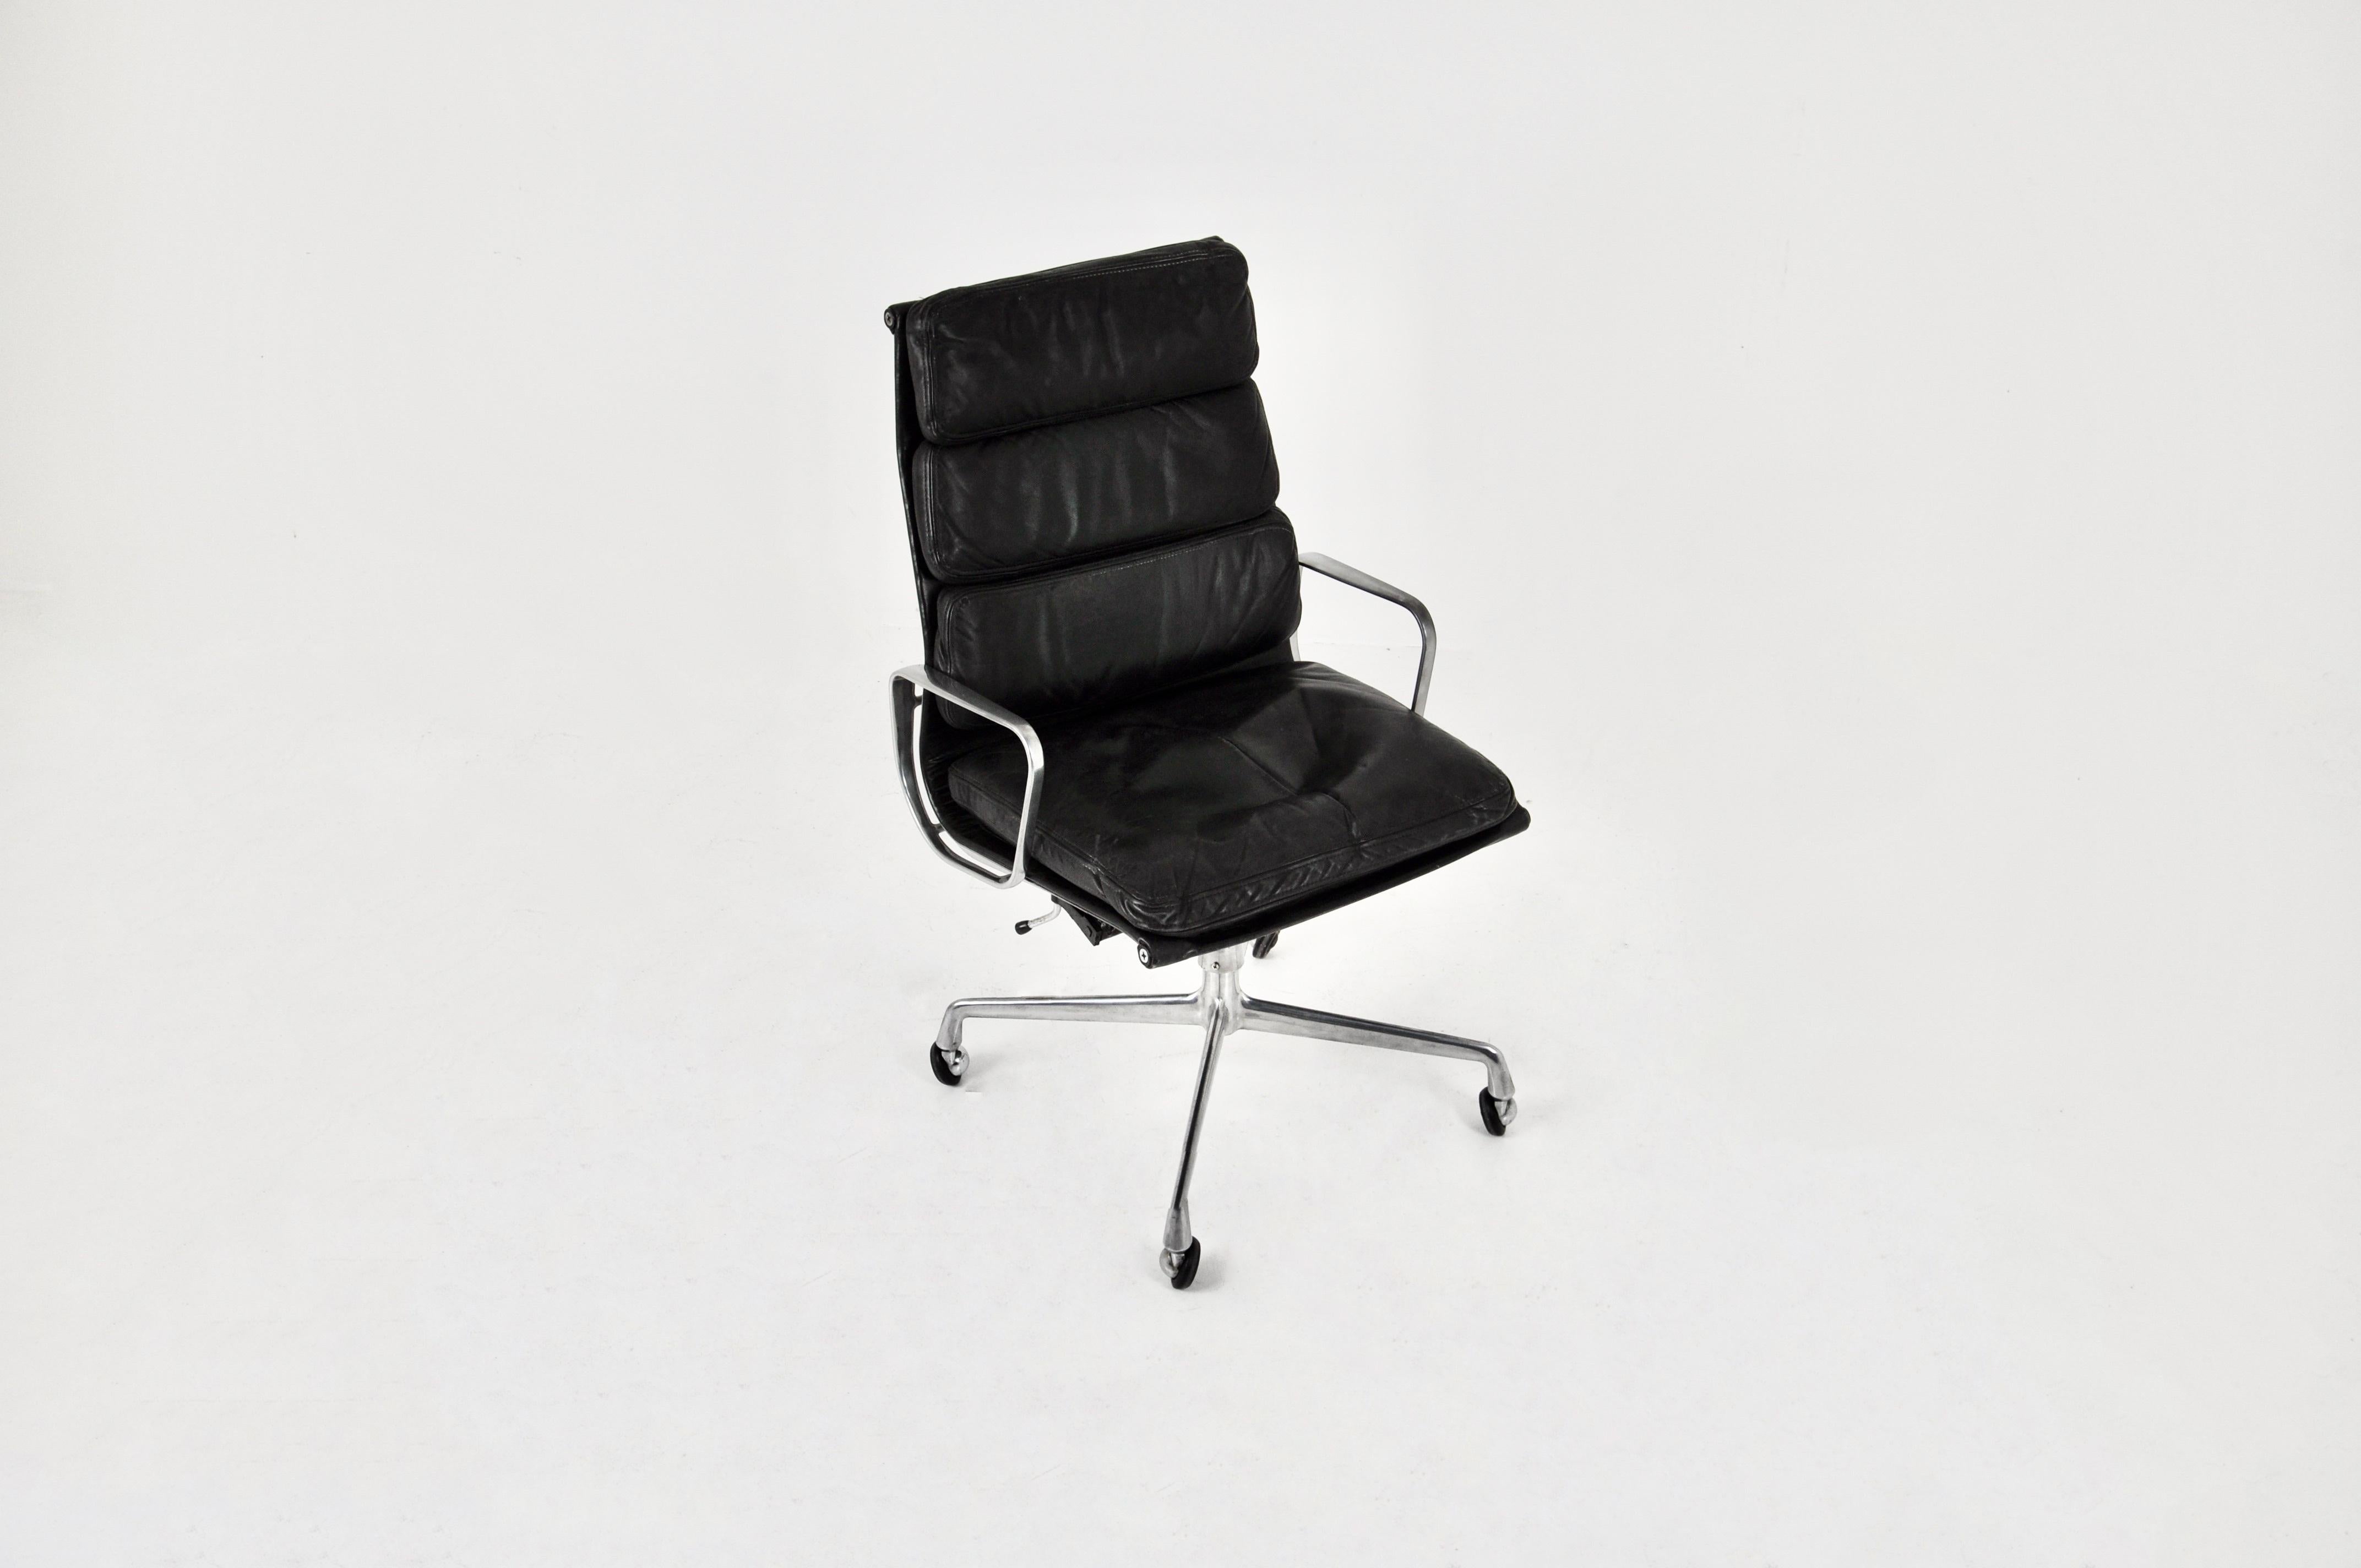 Mid-Century Modern Ea 216 Soft Pad Desk Chair by Charles & Ray Eames for Herman Miller, 1970s For Sale